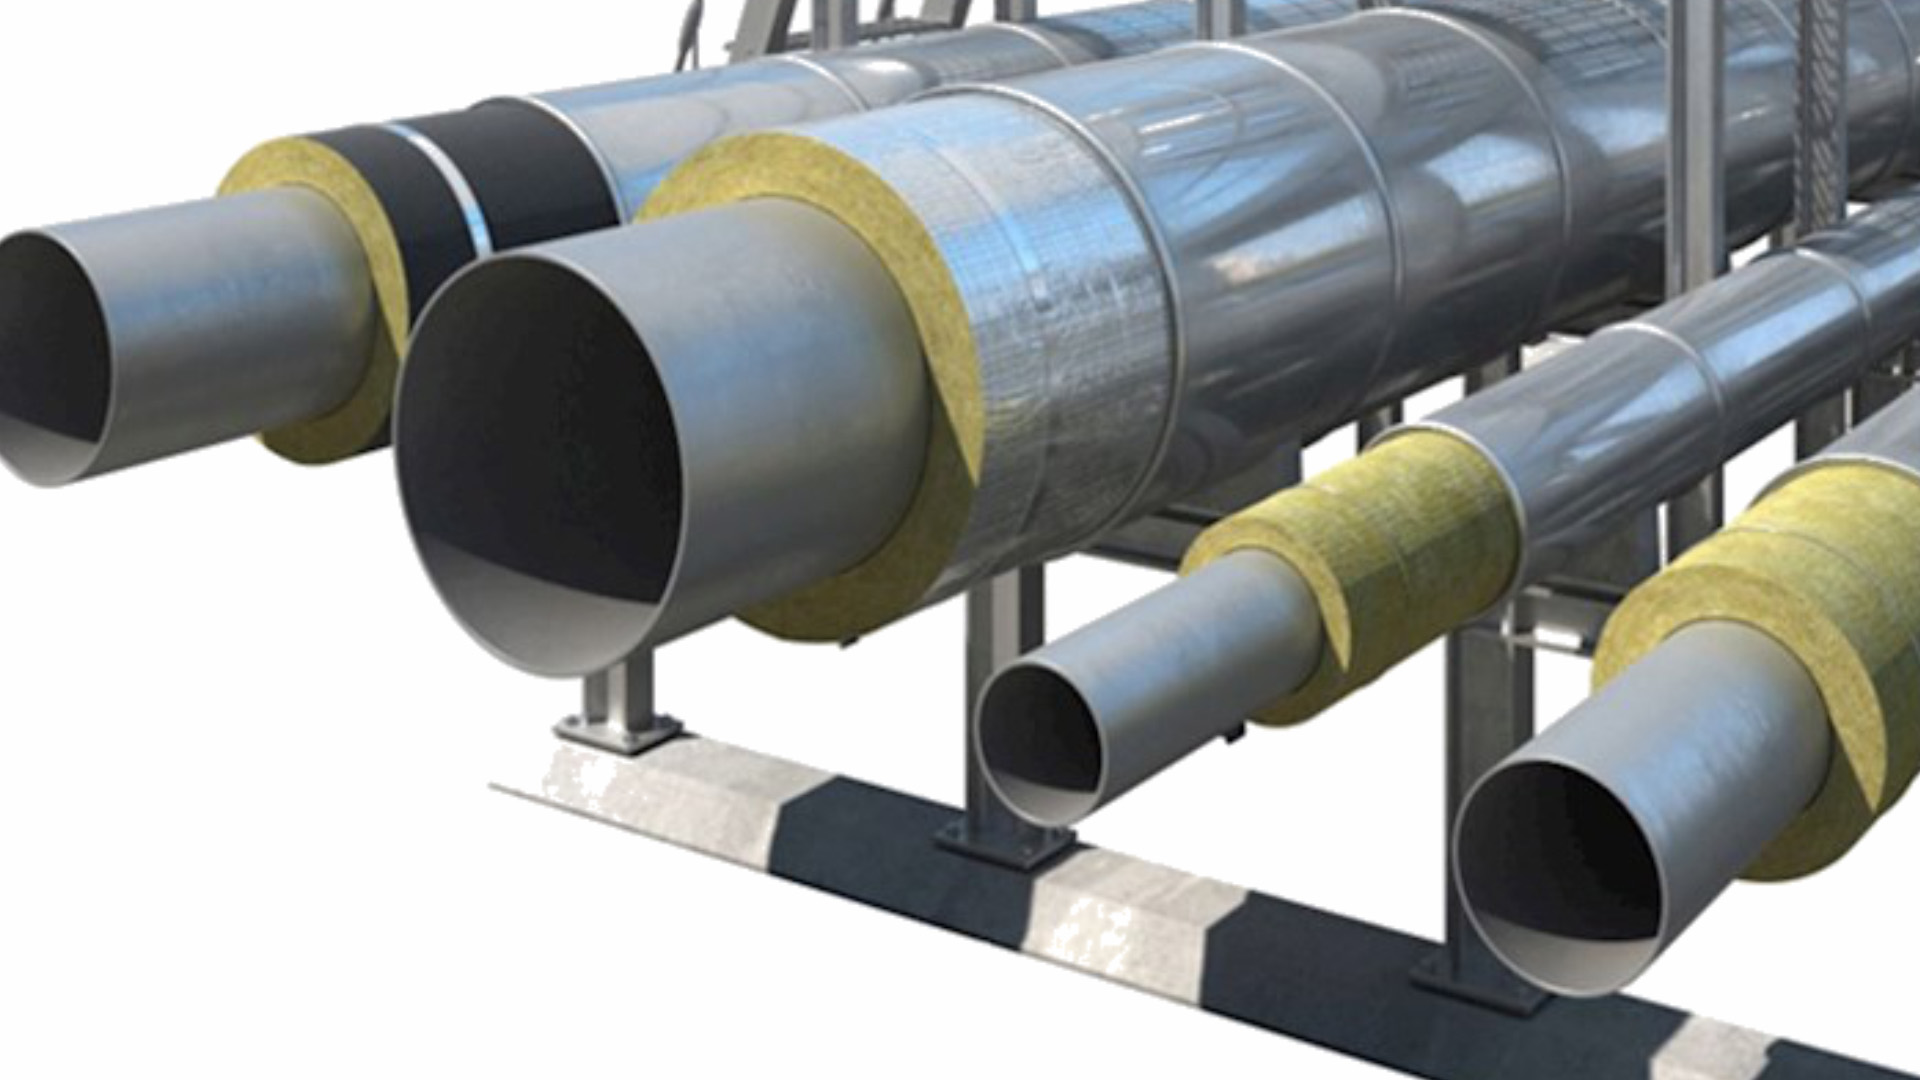 Rockwool Preformed Pipe Section Dubai civil defence approved DCL certified Rock wood pipes